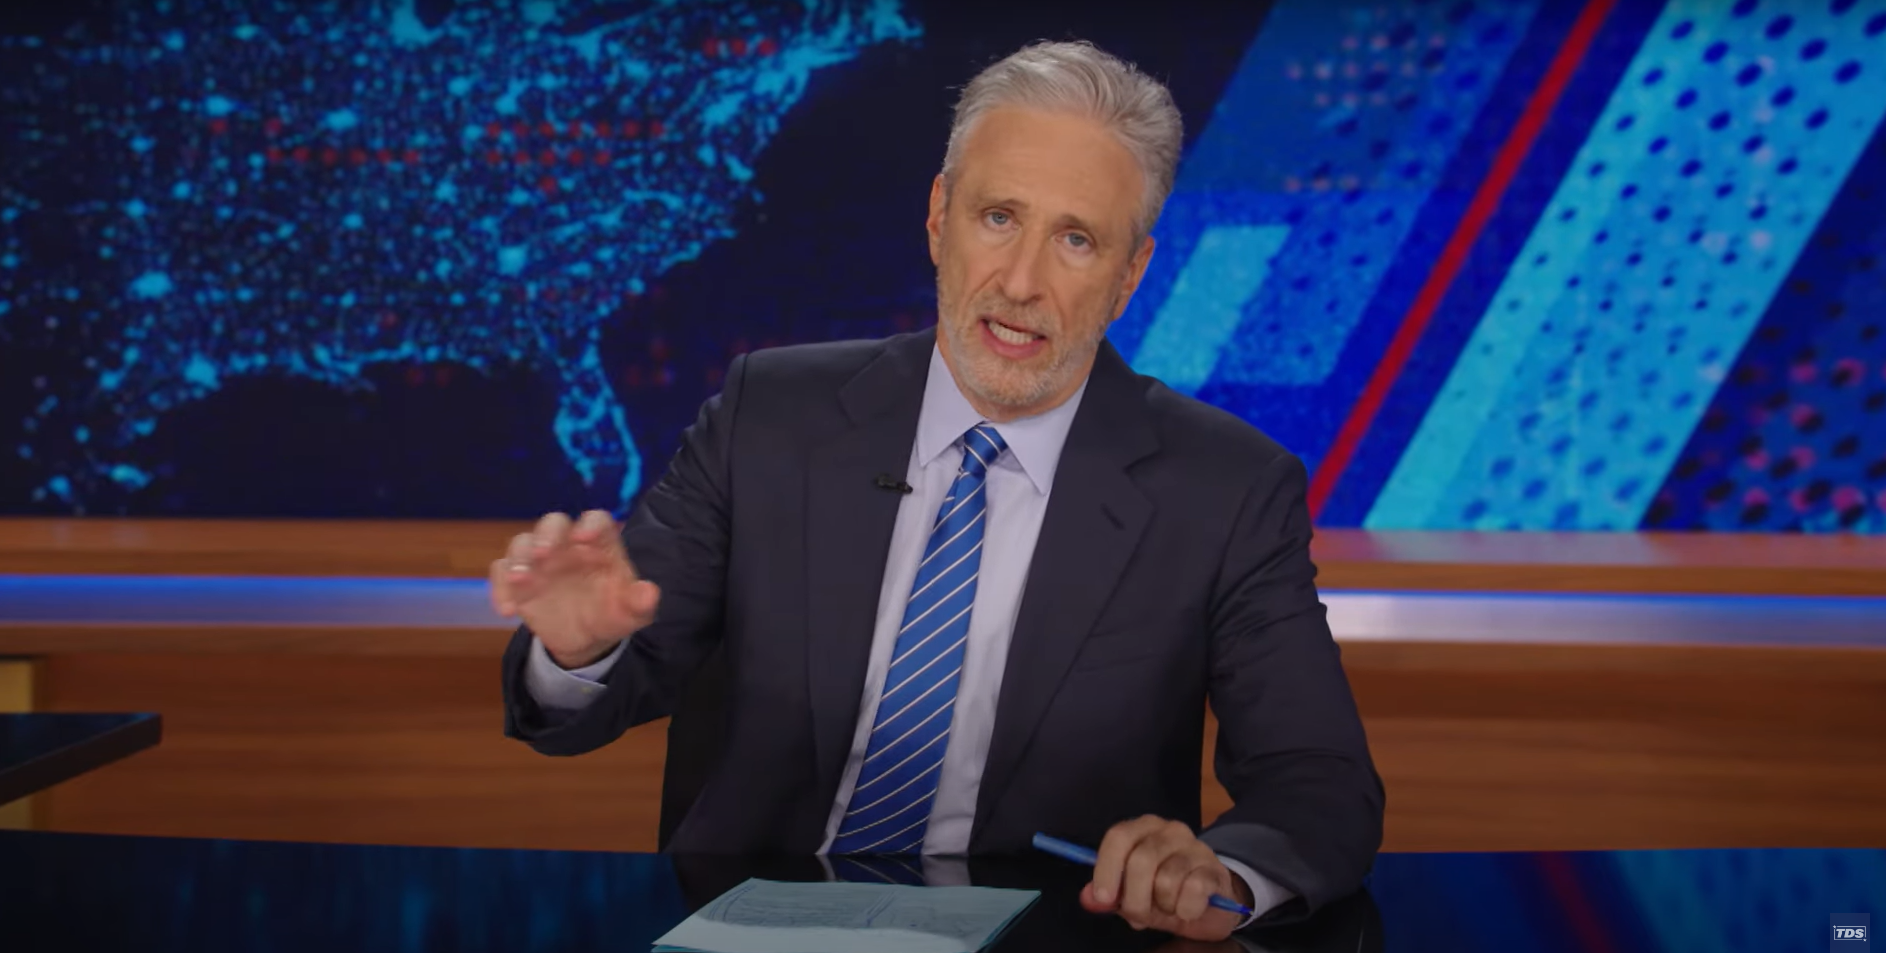 Jon Stewart responded to Donald Trump’s trial verdict on his show on Monday